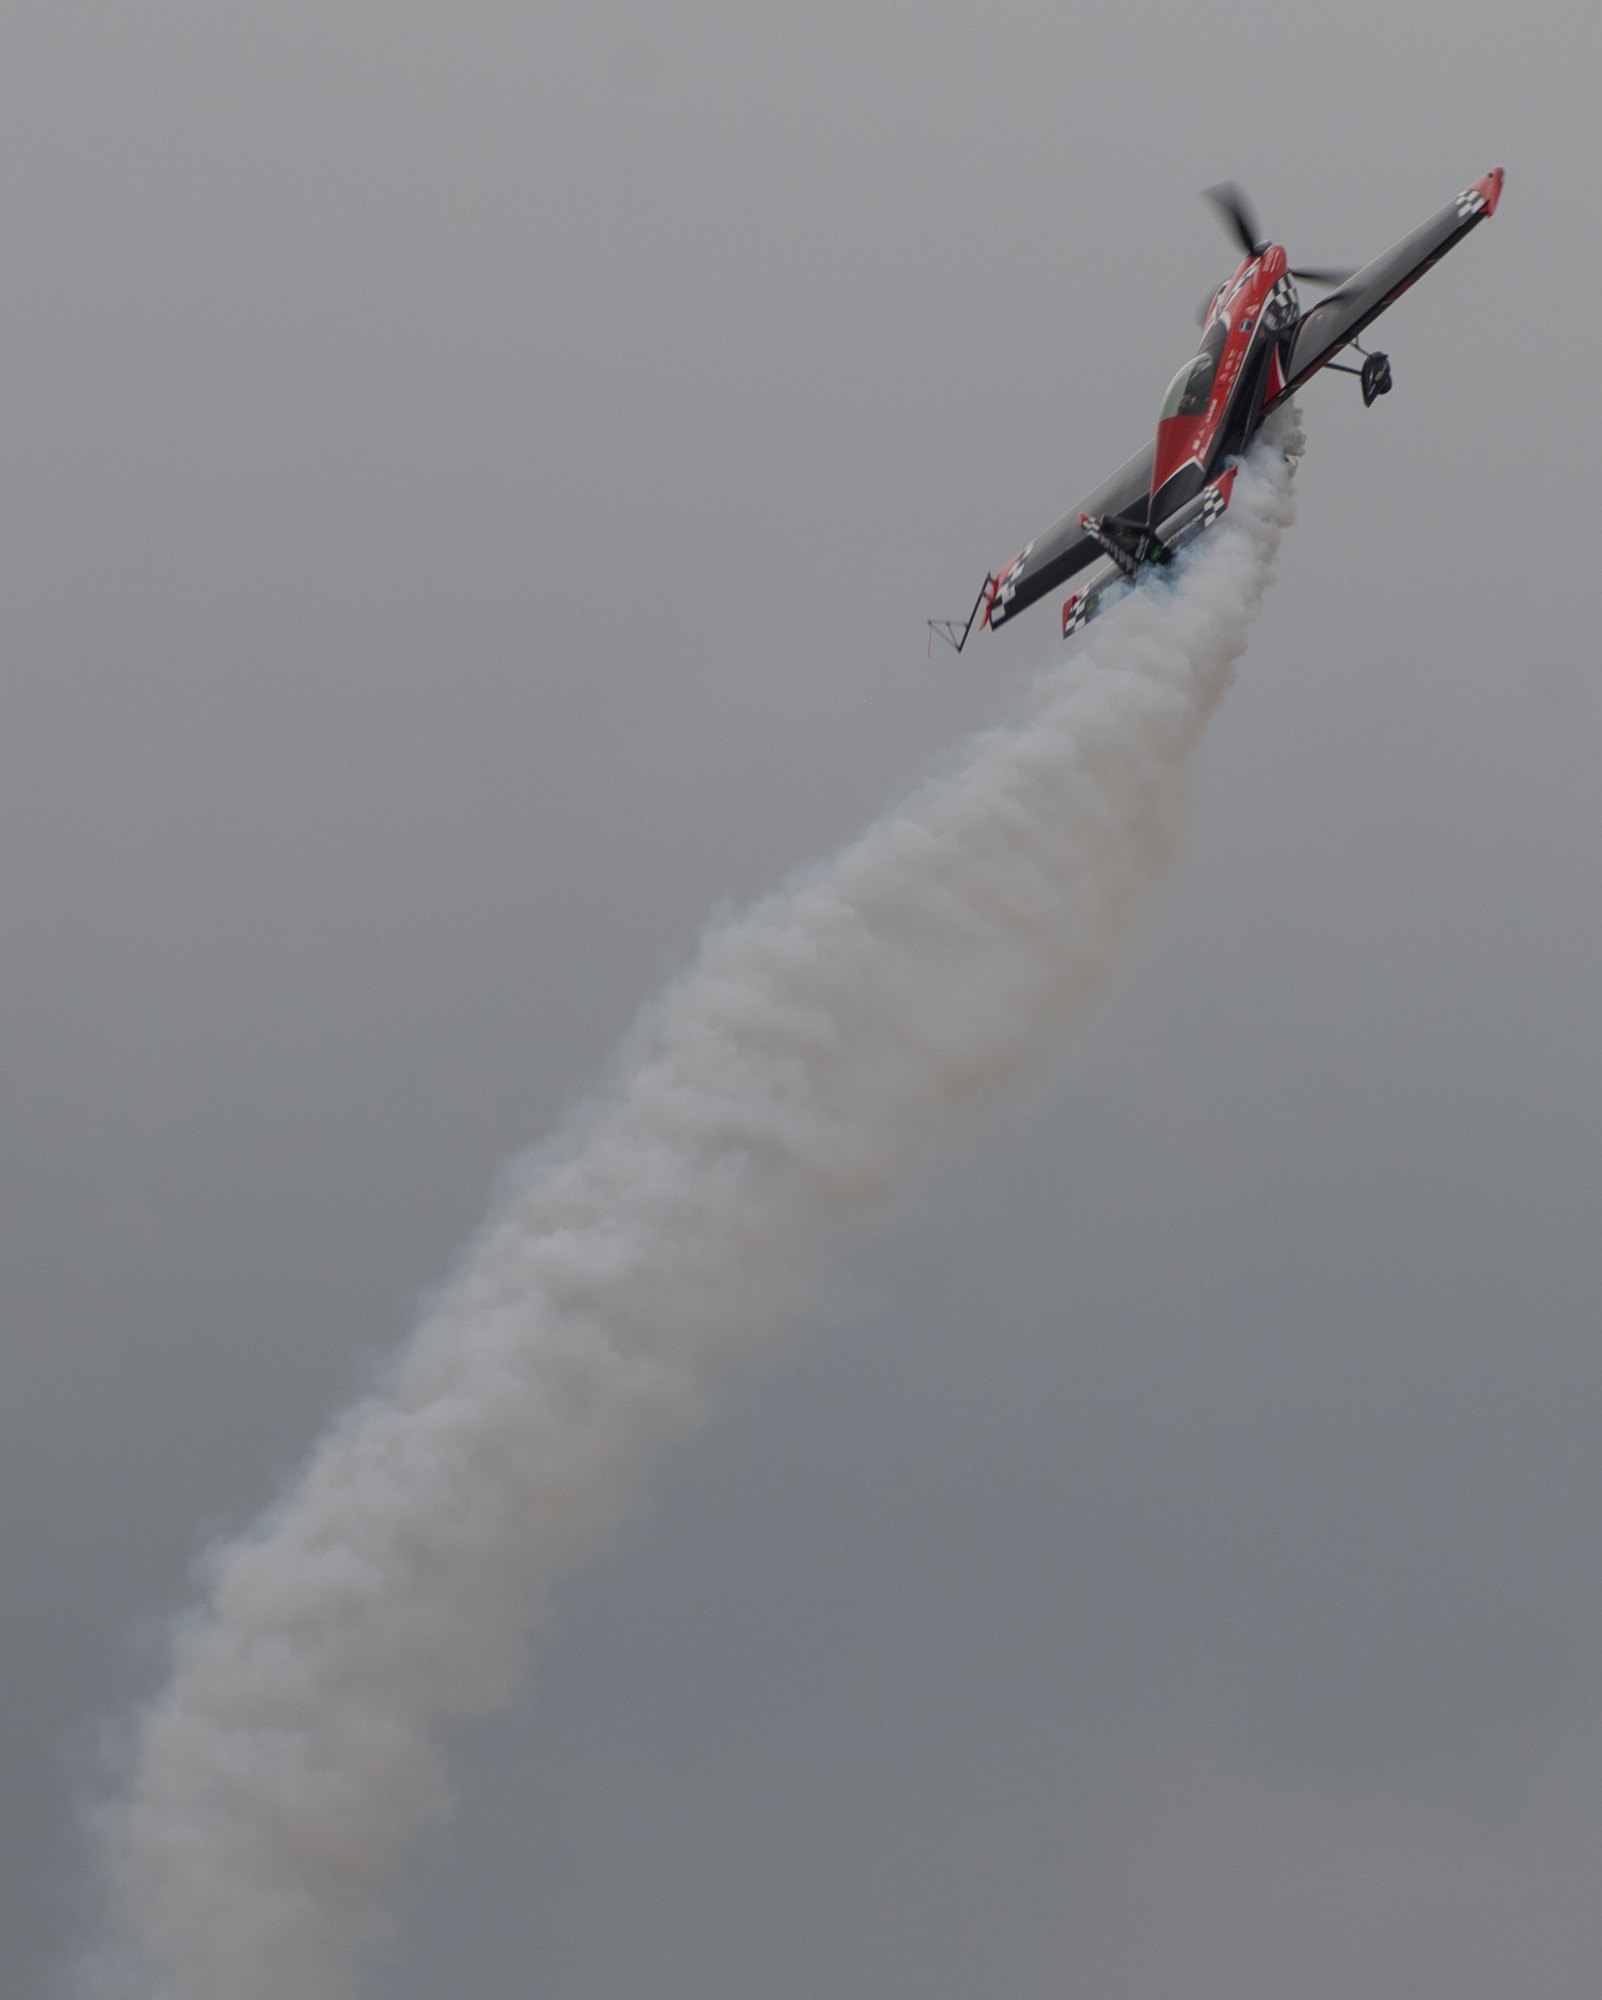 Rob Holland, pilot, performs during the Barksdale Defenders of Liberty Air & Space Show at Barksdale Air Force Base, Louisiana, May 9, 2021. Rob Holland is a four-time, consecutive, world four-minute Freestyle Champion. (U.S. Air Force photo by Airman 1st Class Jonathan E. Ramos)